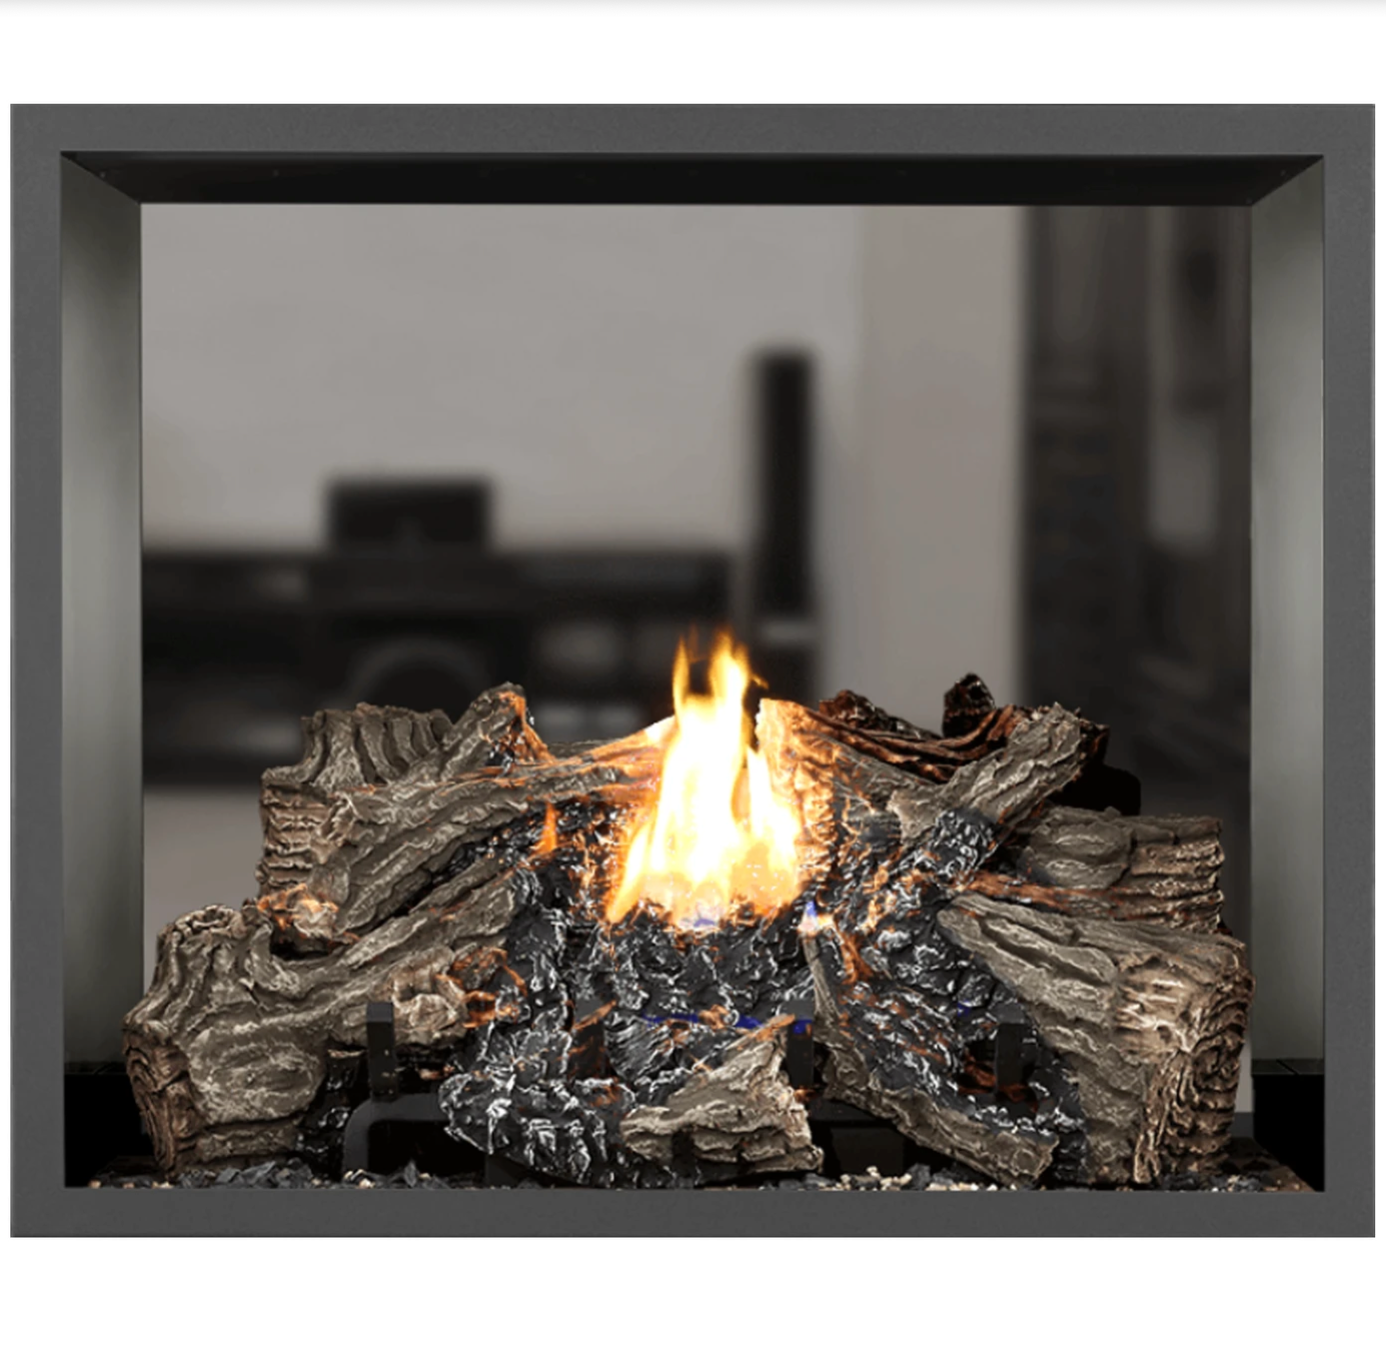 High Definition 81 See Through Fireplace  Dimensions